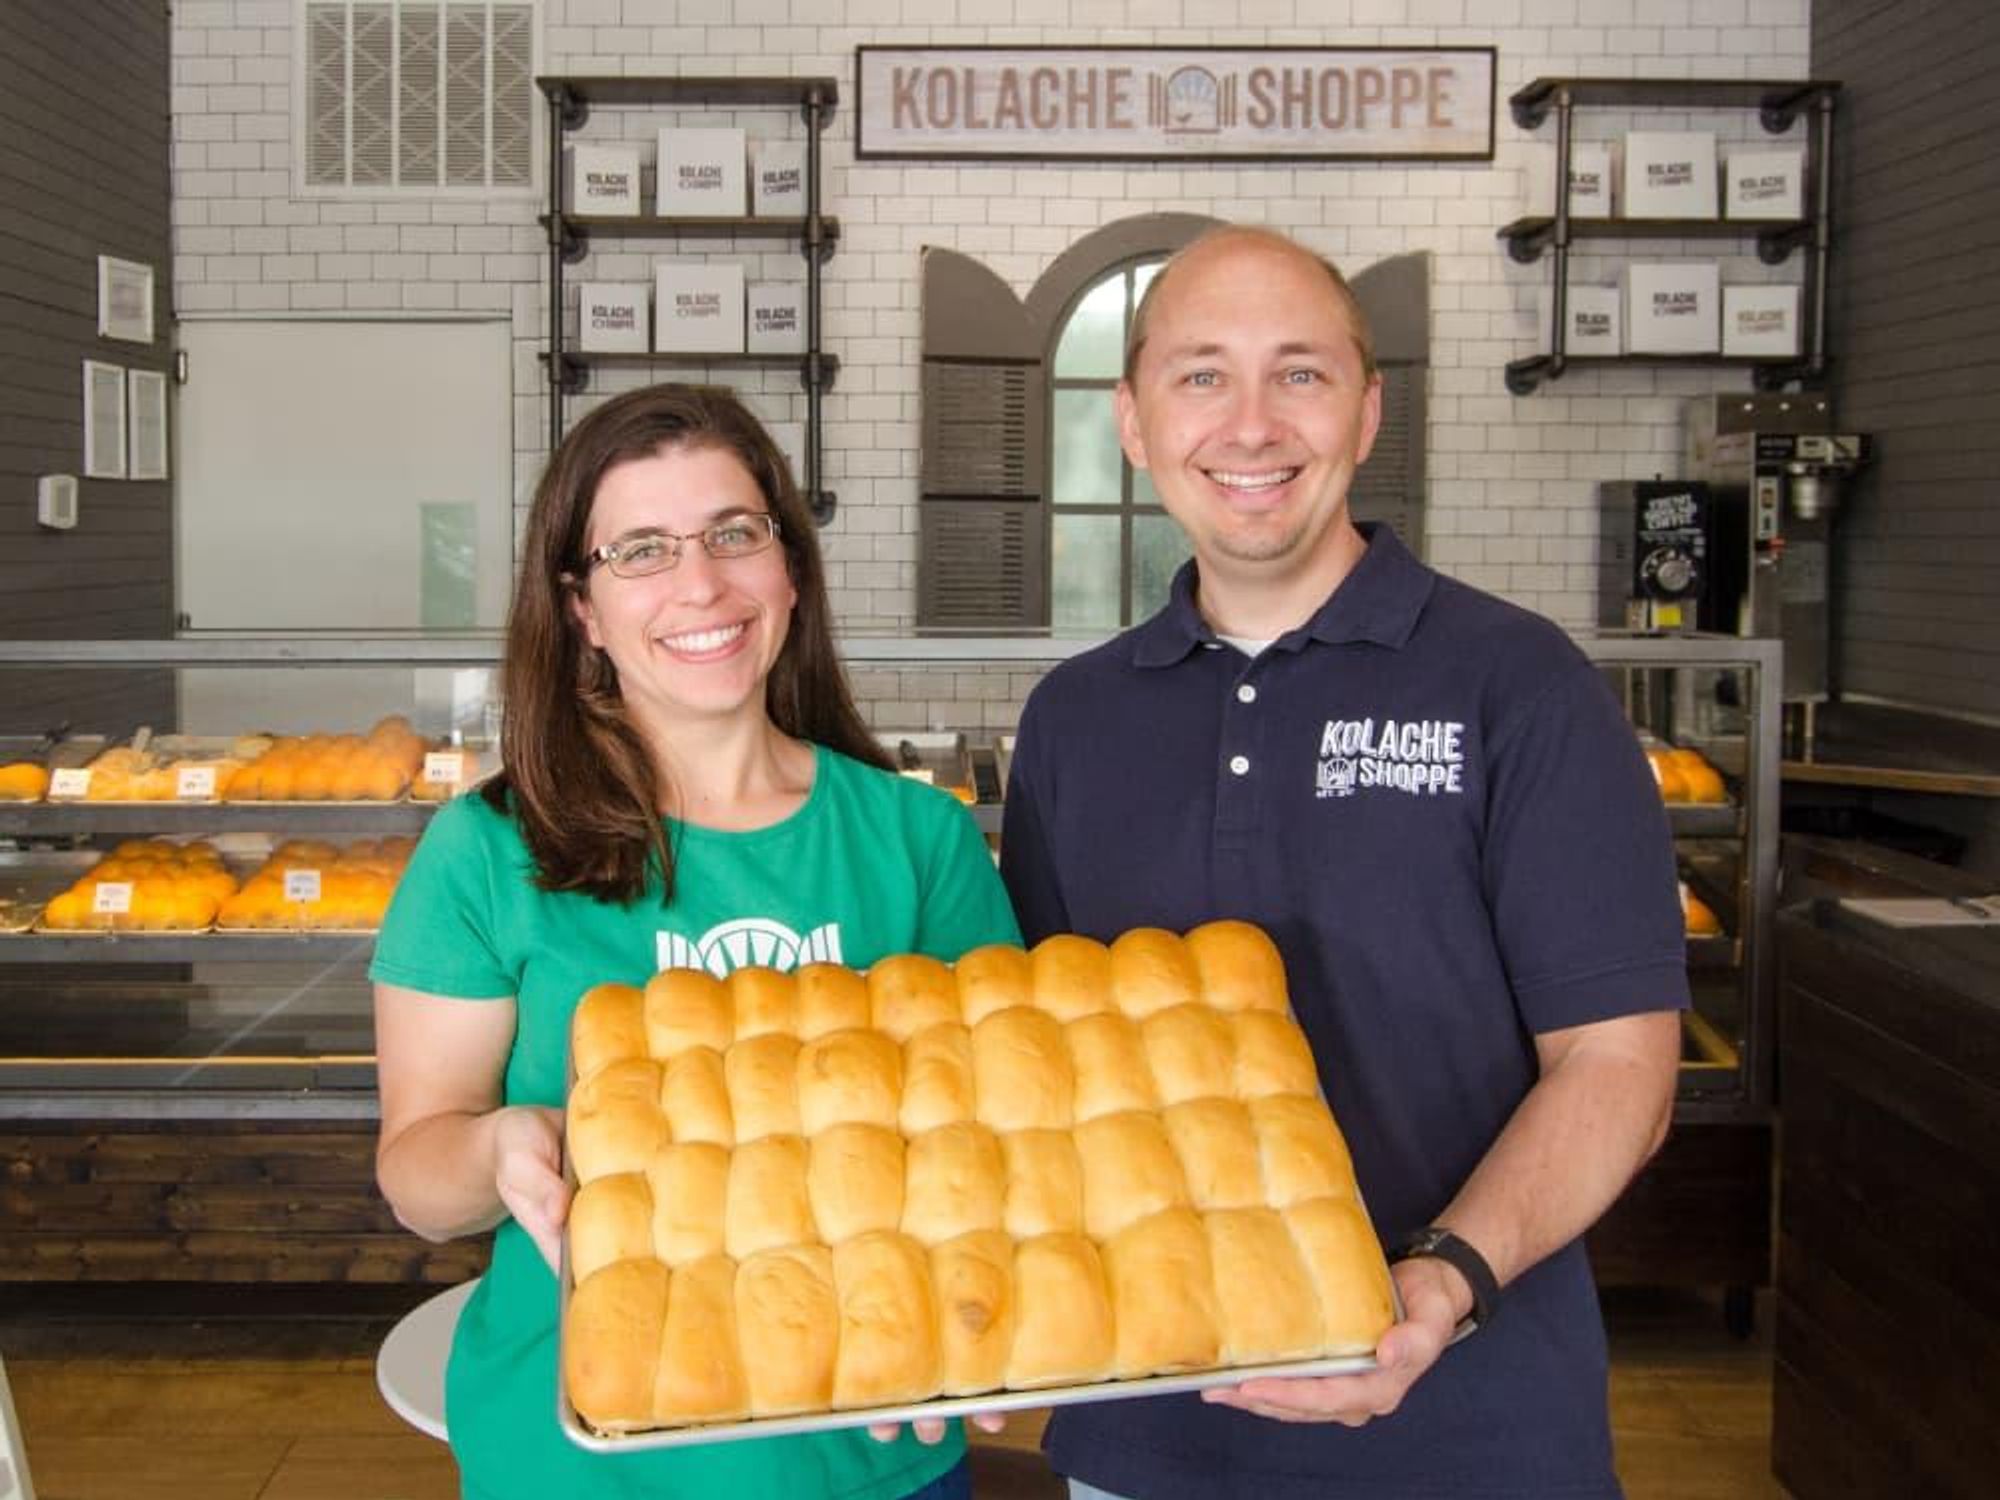 Houston, Kolache Shoppe The Heights, June 2017, owners Randy and Lucy Hines